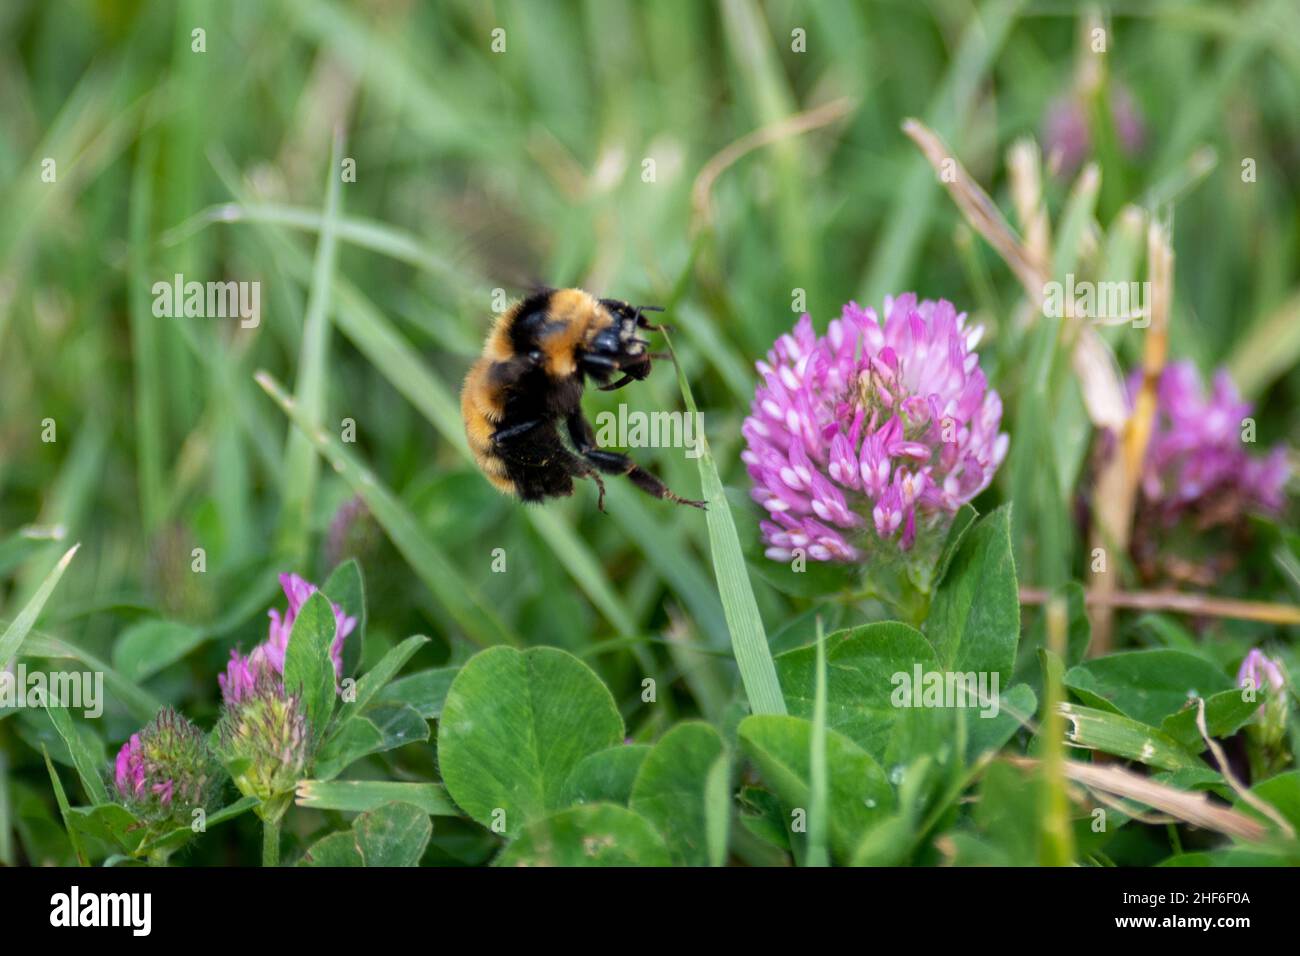 A macro of a large black and yellow bumblebee on a vibrant pink flower near lavender and grass. The honeybee has large eyes and two antennas. Stock Photo